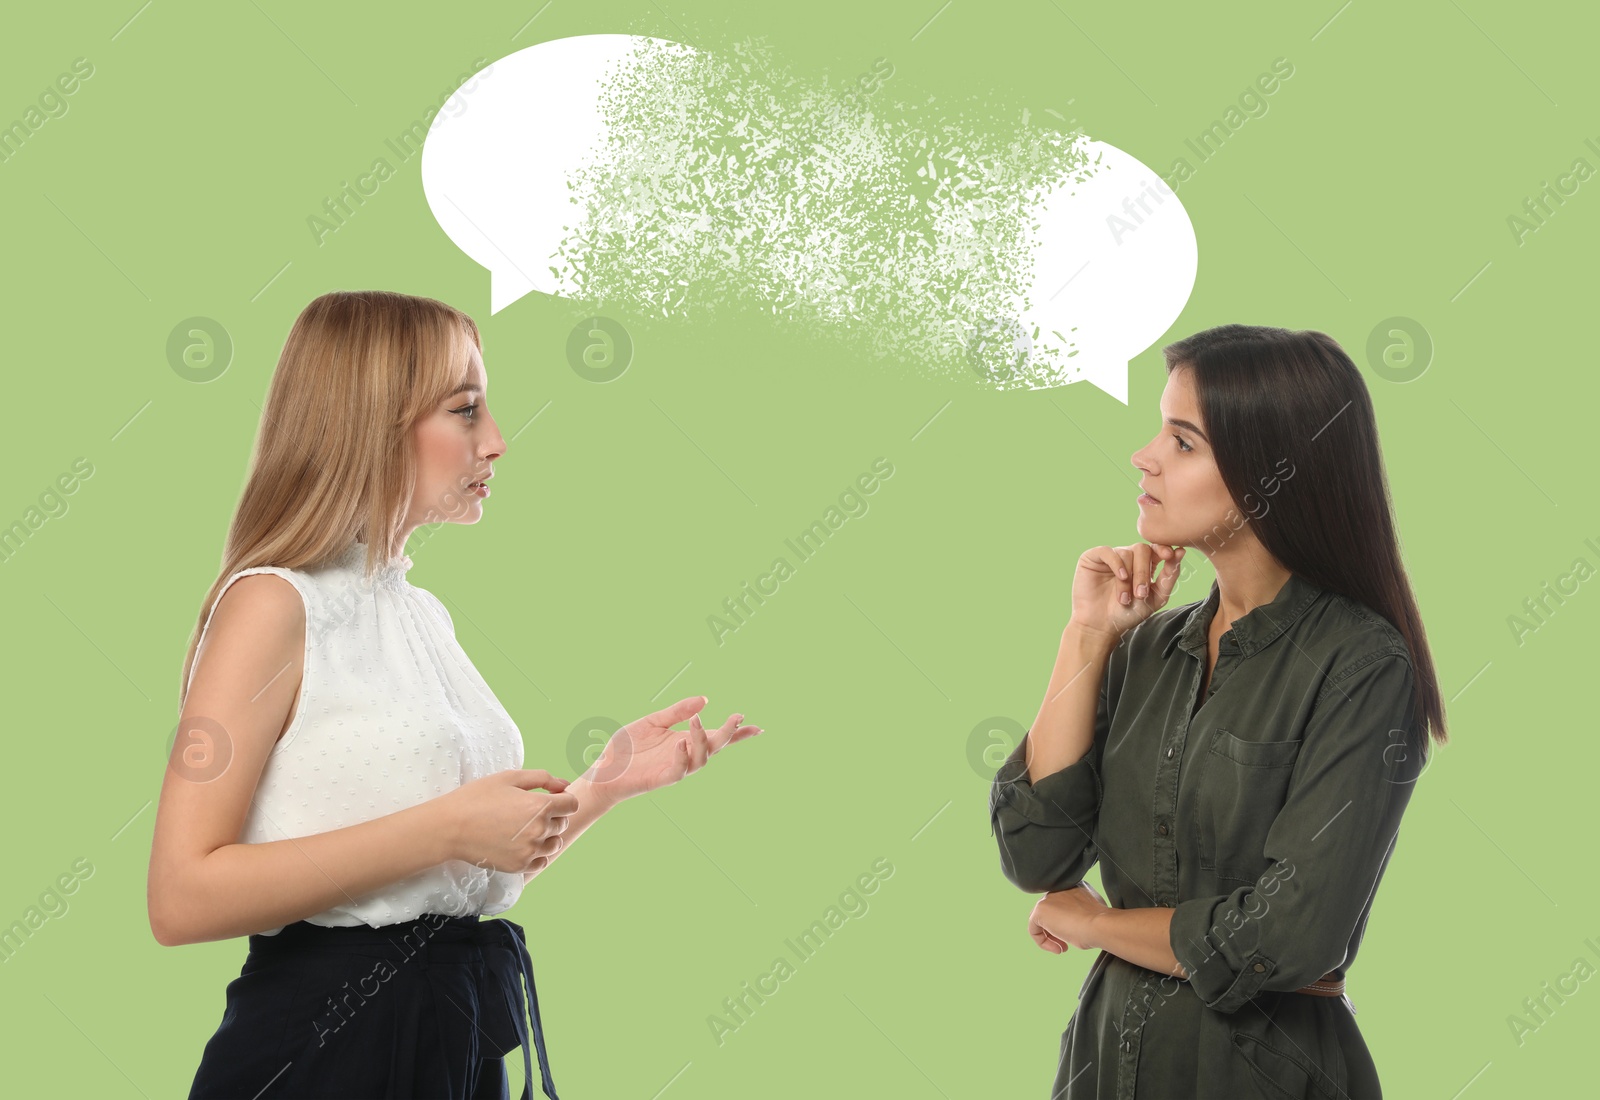 Image of Young women talking on light olive color background. Dialogue illustration with speech bubbles